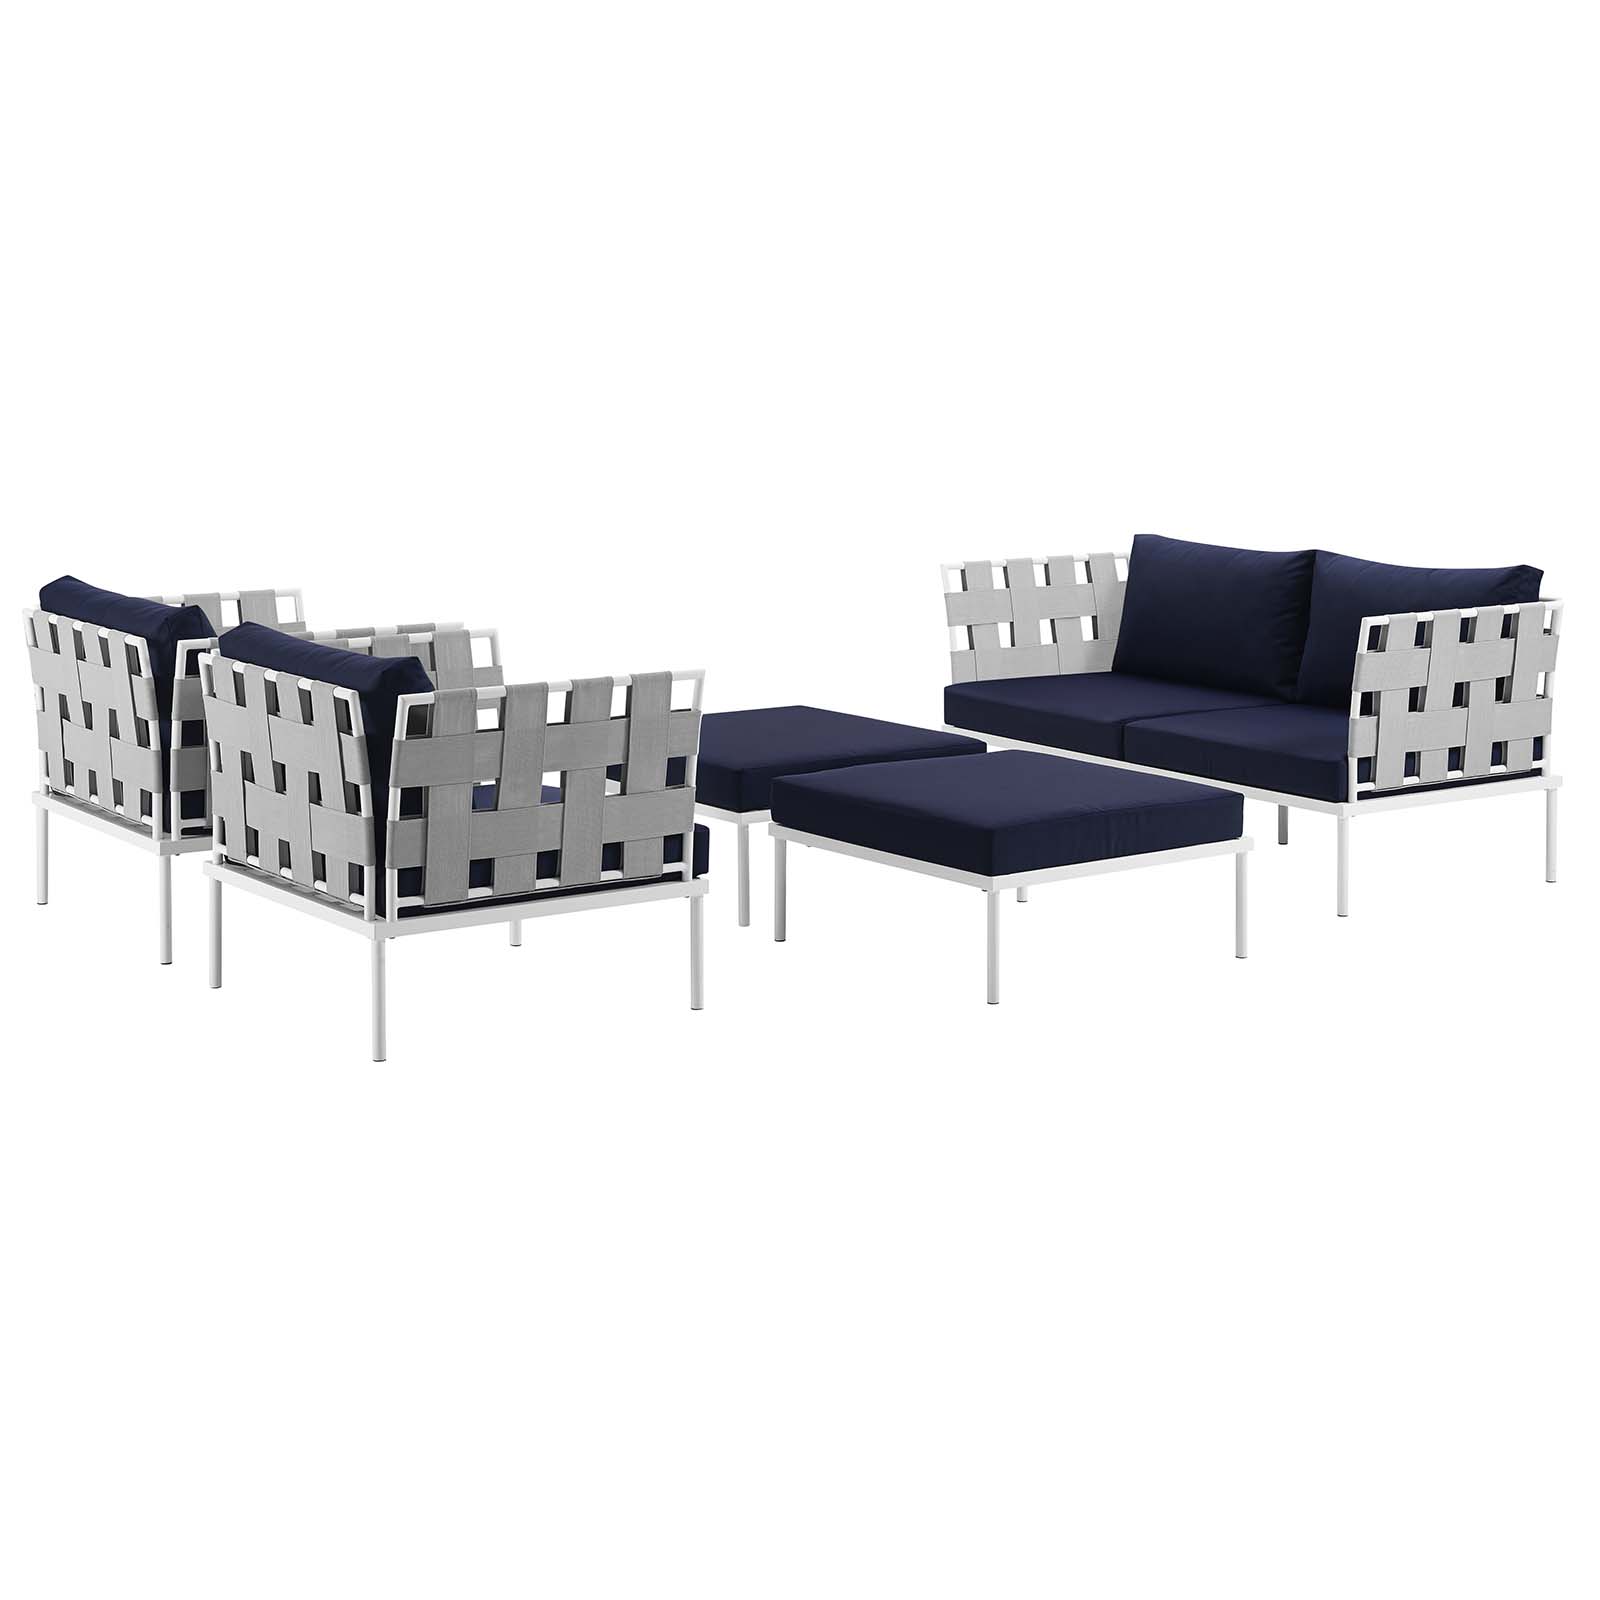 Modway Harmony 5 Piece Outdoor Patio Aluminum Sectional Sofa Set in White Navy - image 3 of 7